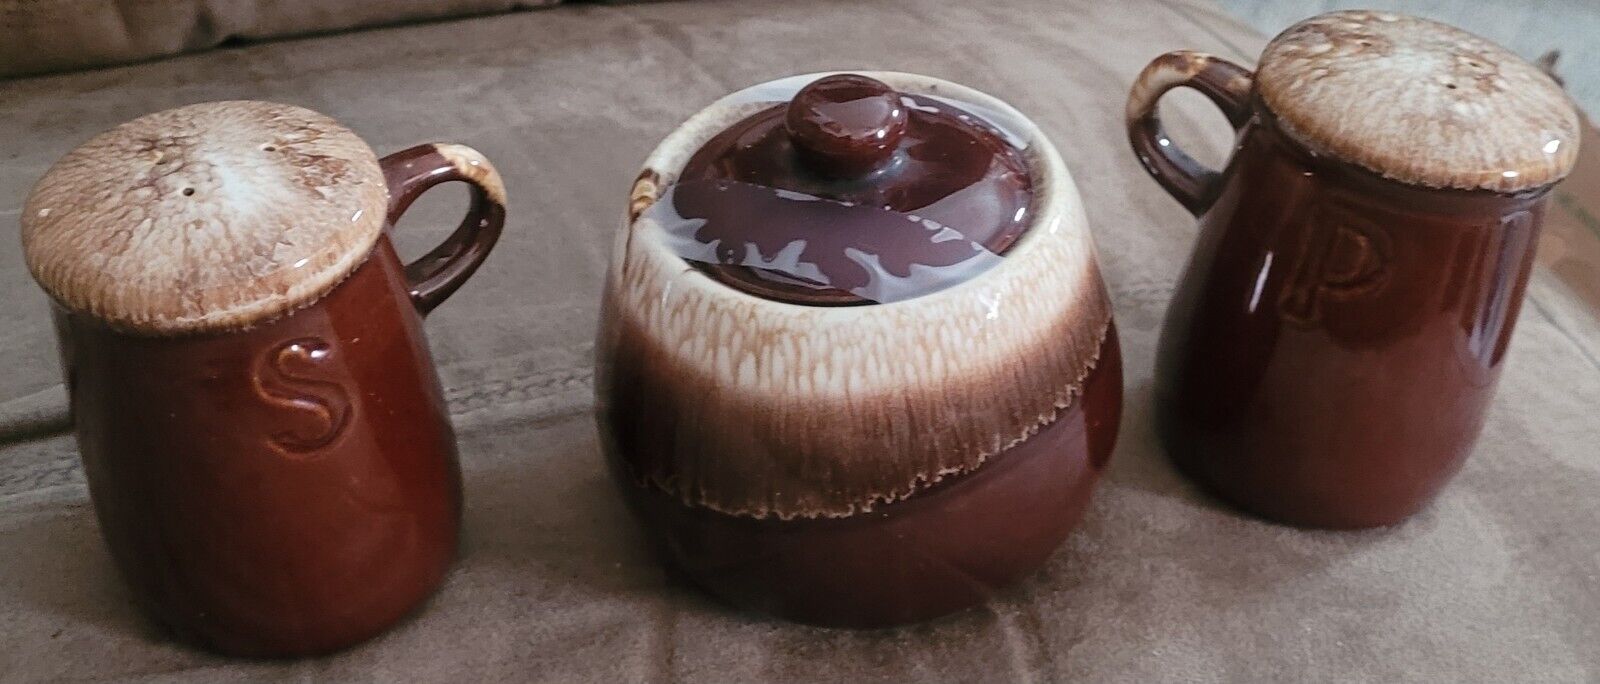  McCoy Brown Drip glaze Sugar Bowl and Salt and Pepper Shakers No chips, cracks